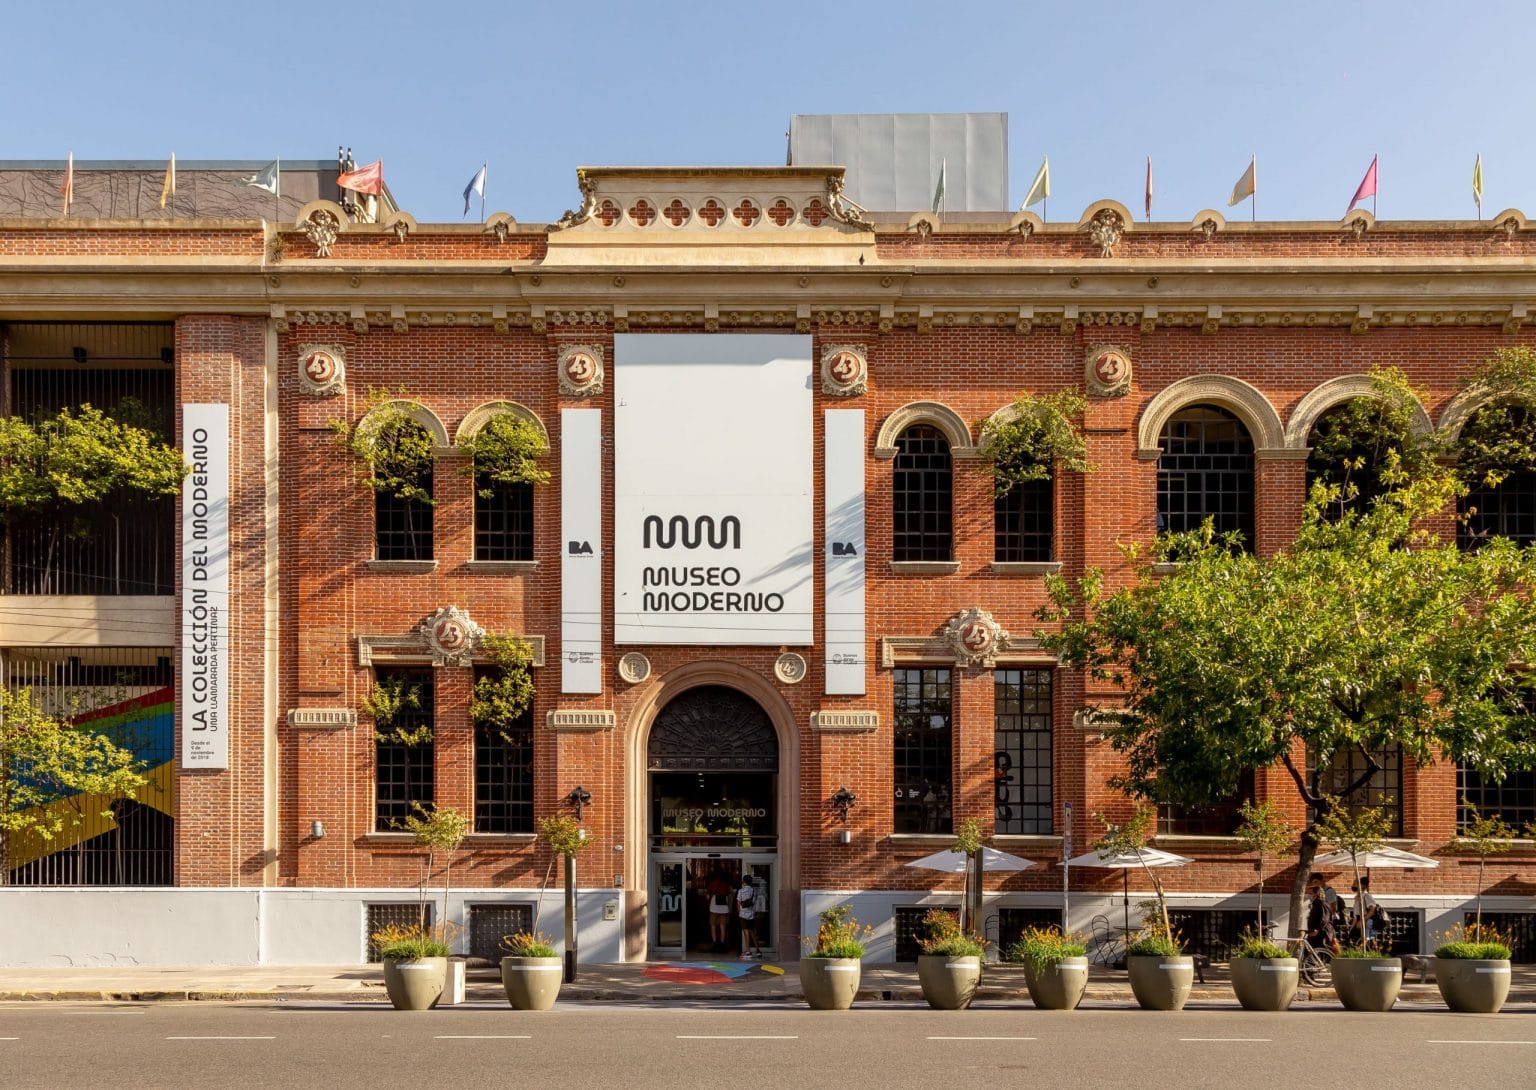 Museo Moderno Museum Buenos Aires